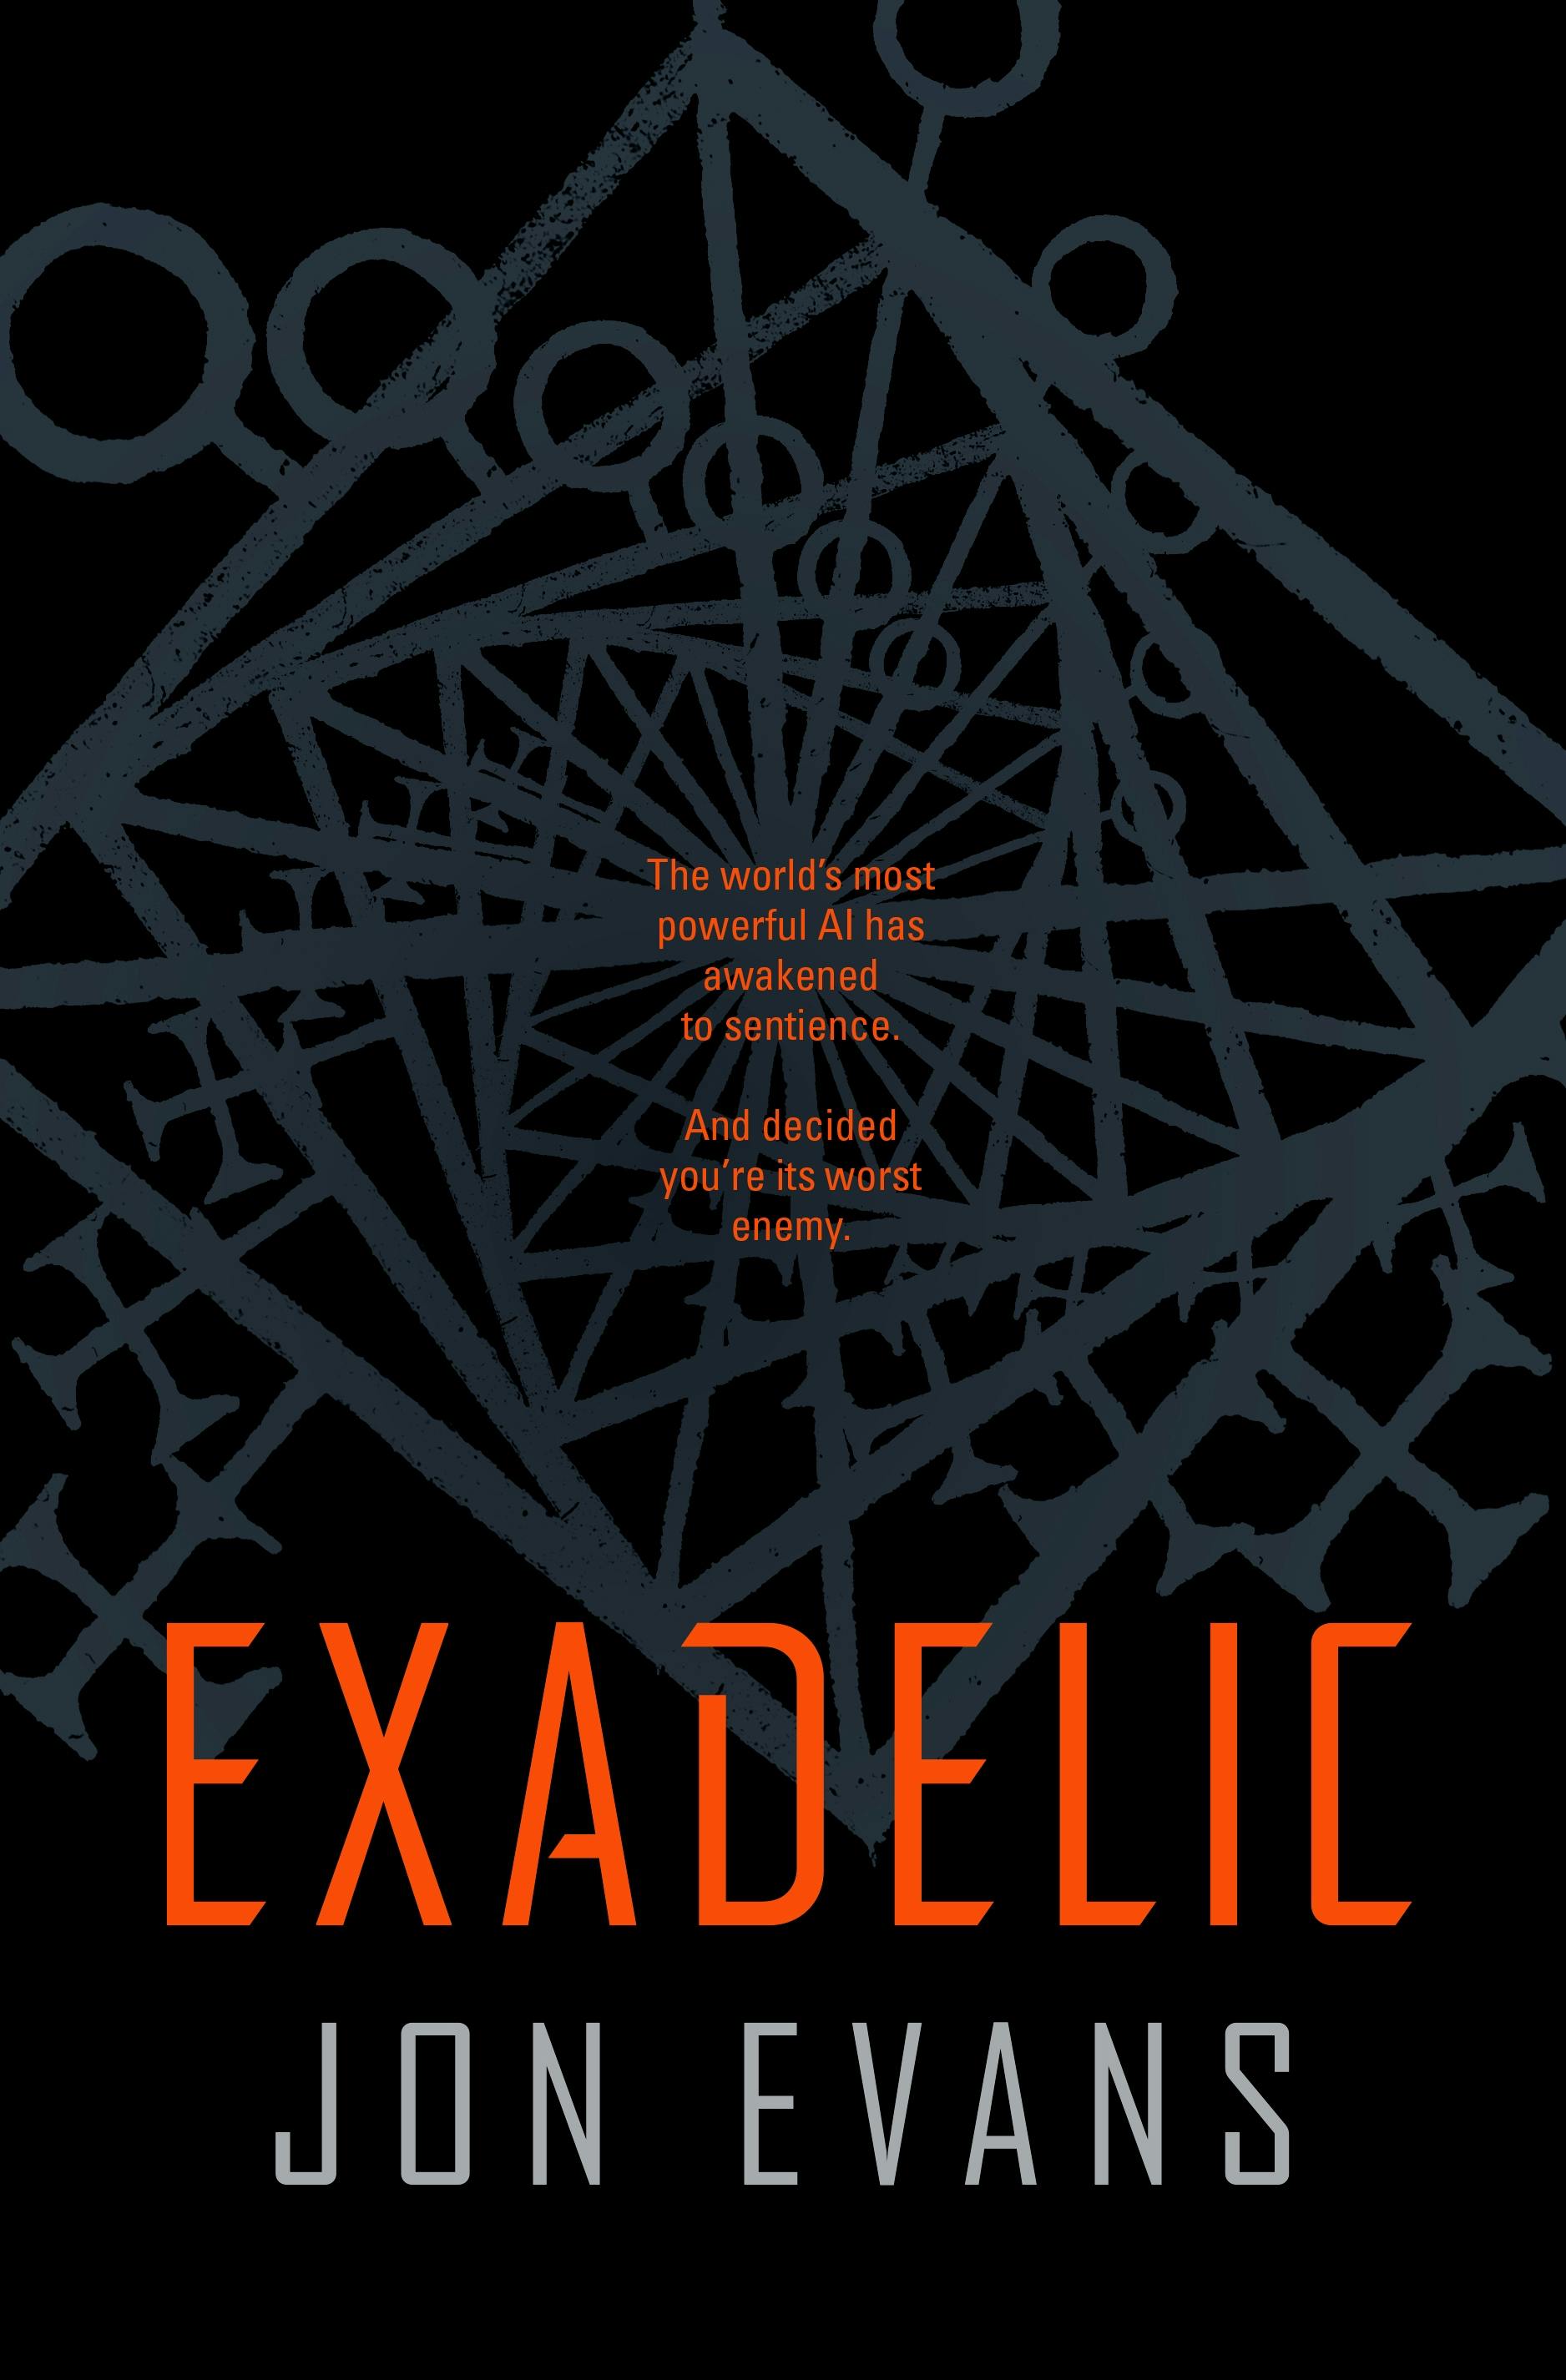 Cover for the book titled as: Exadelic